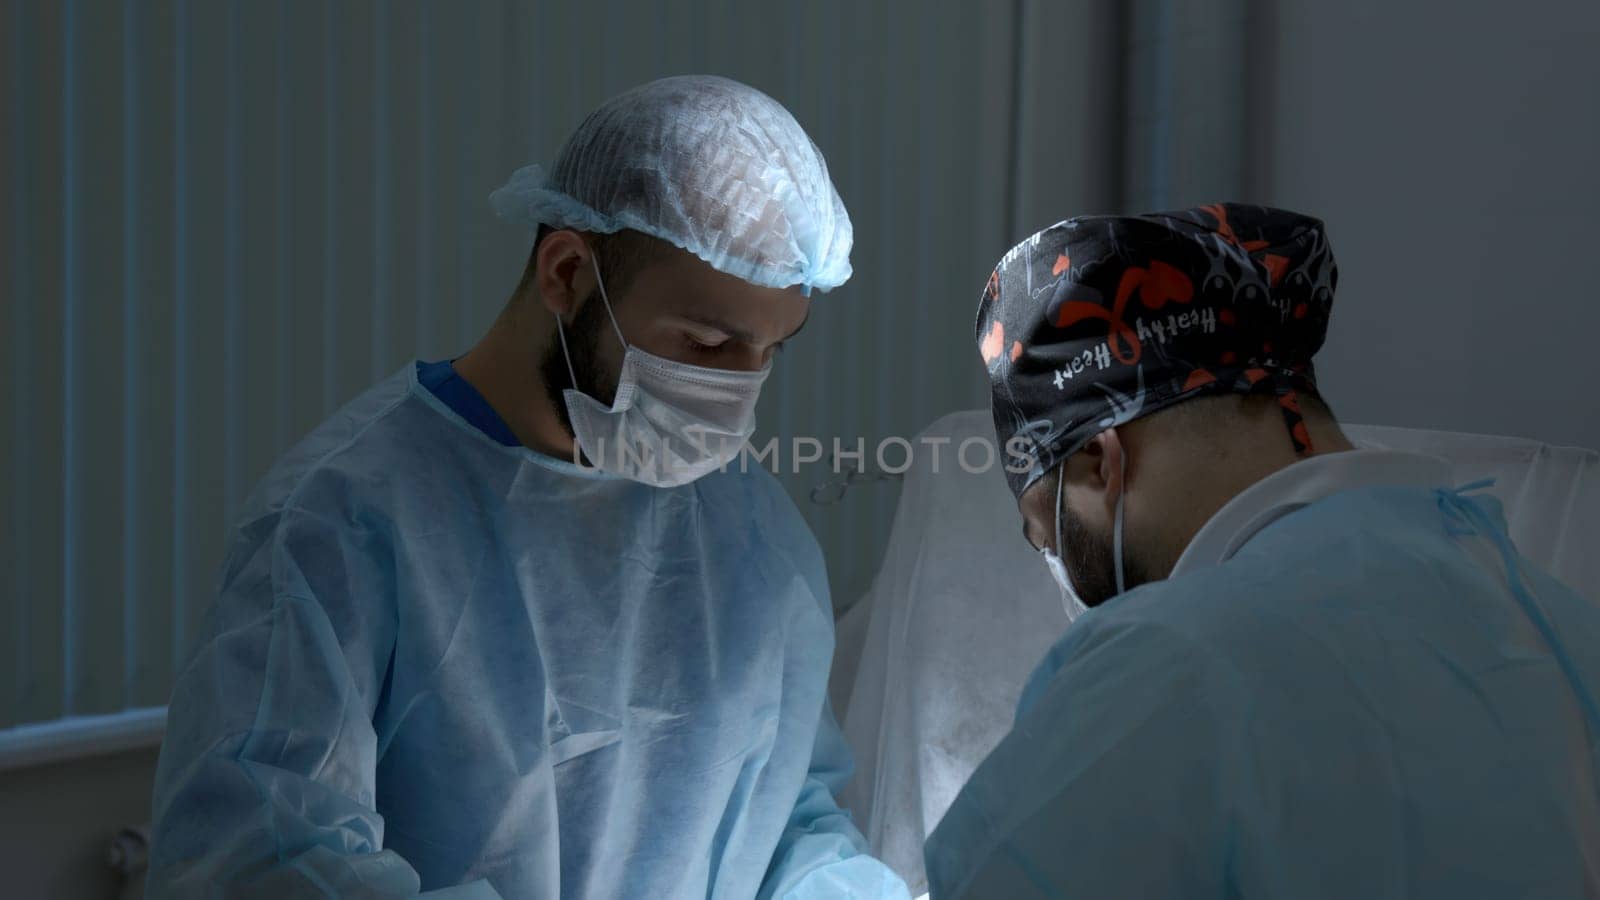 Surgery operation at a hospital. Action. Surgeons during medical procedure, treatment concept